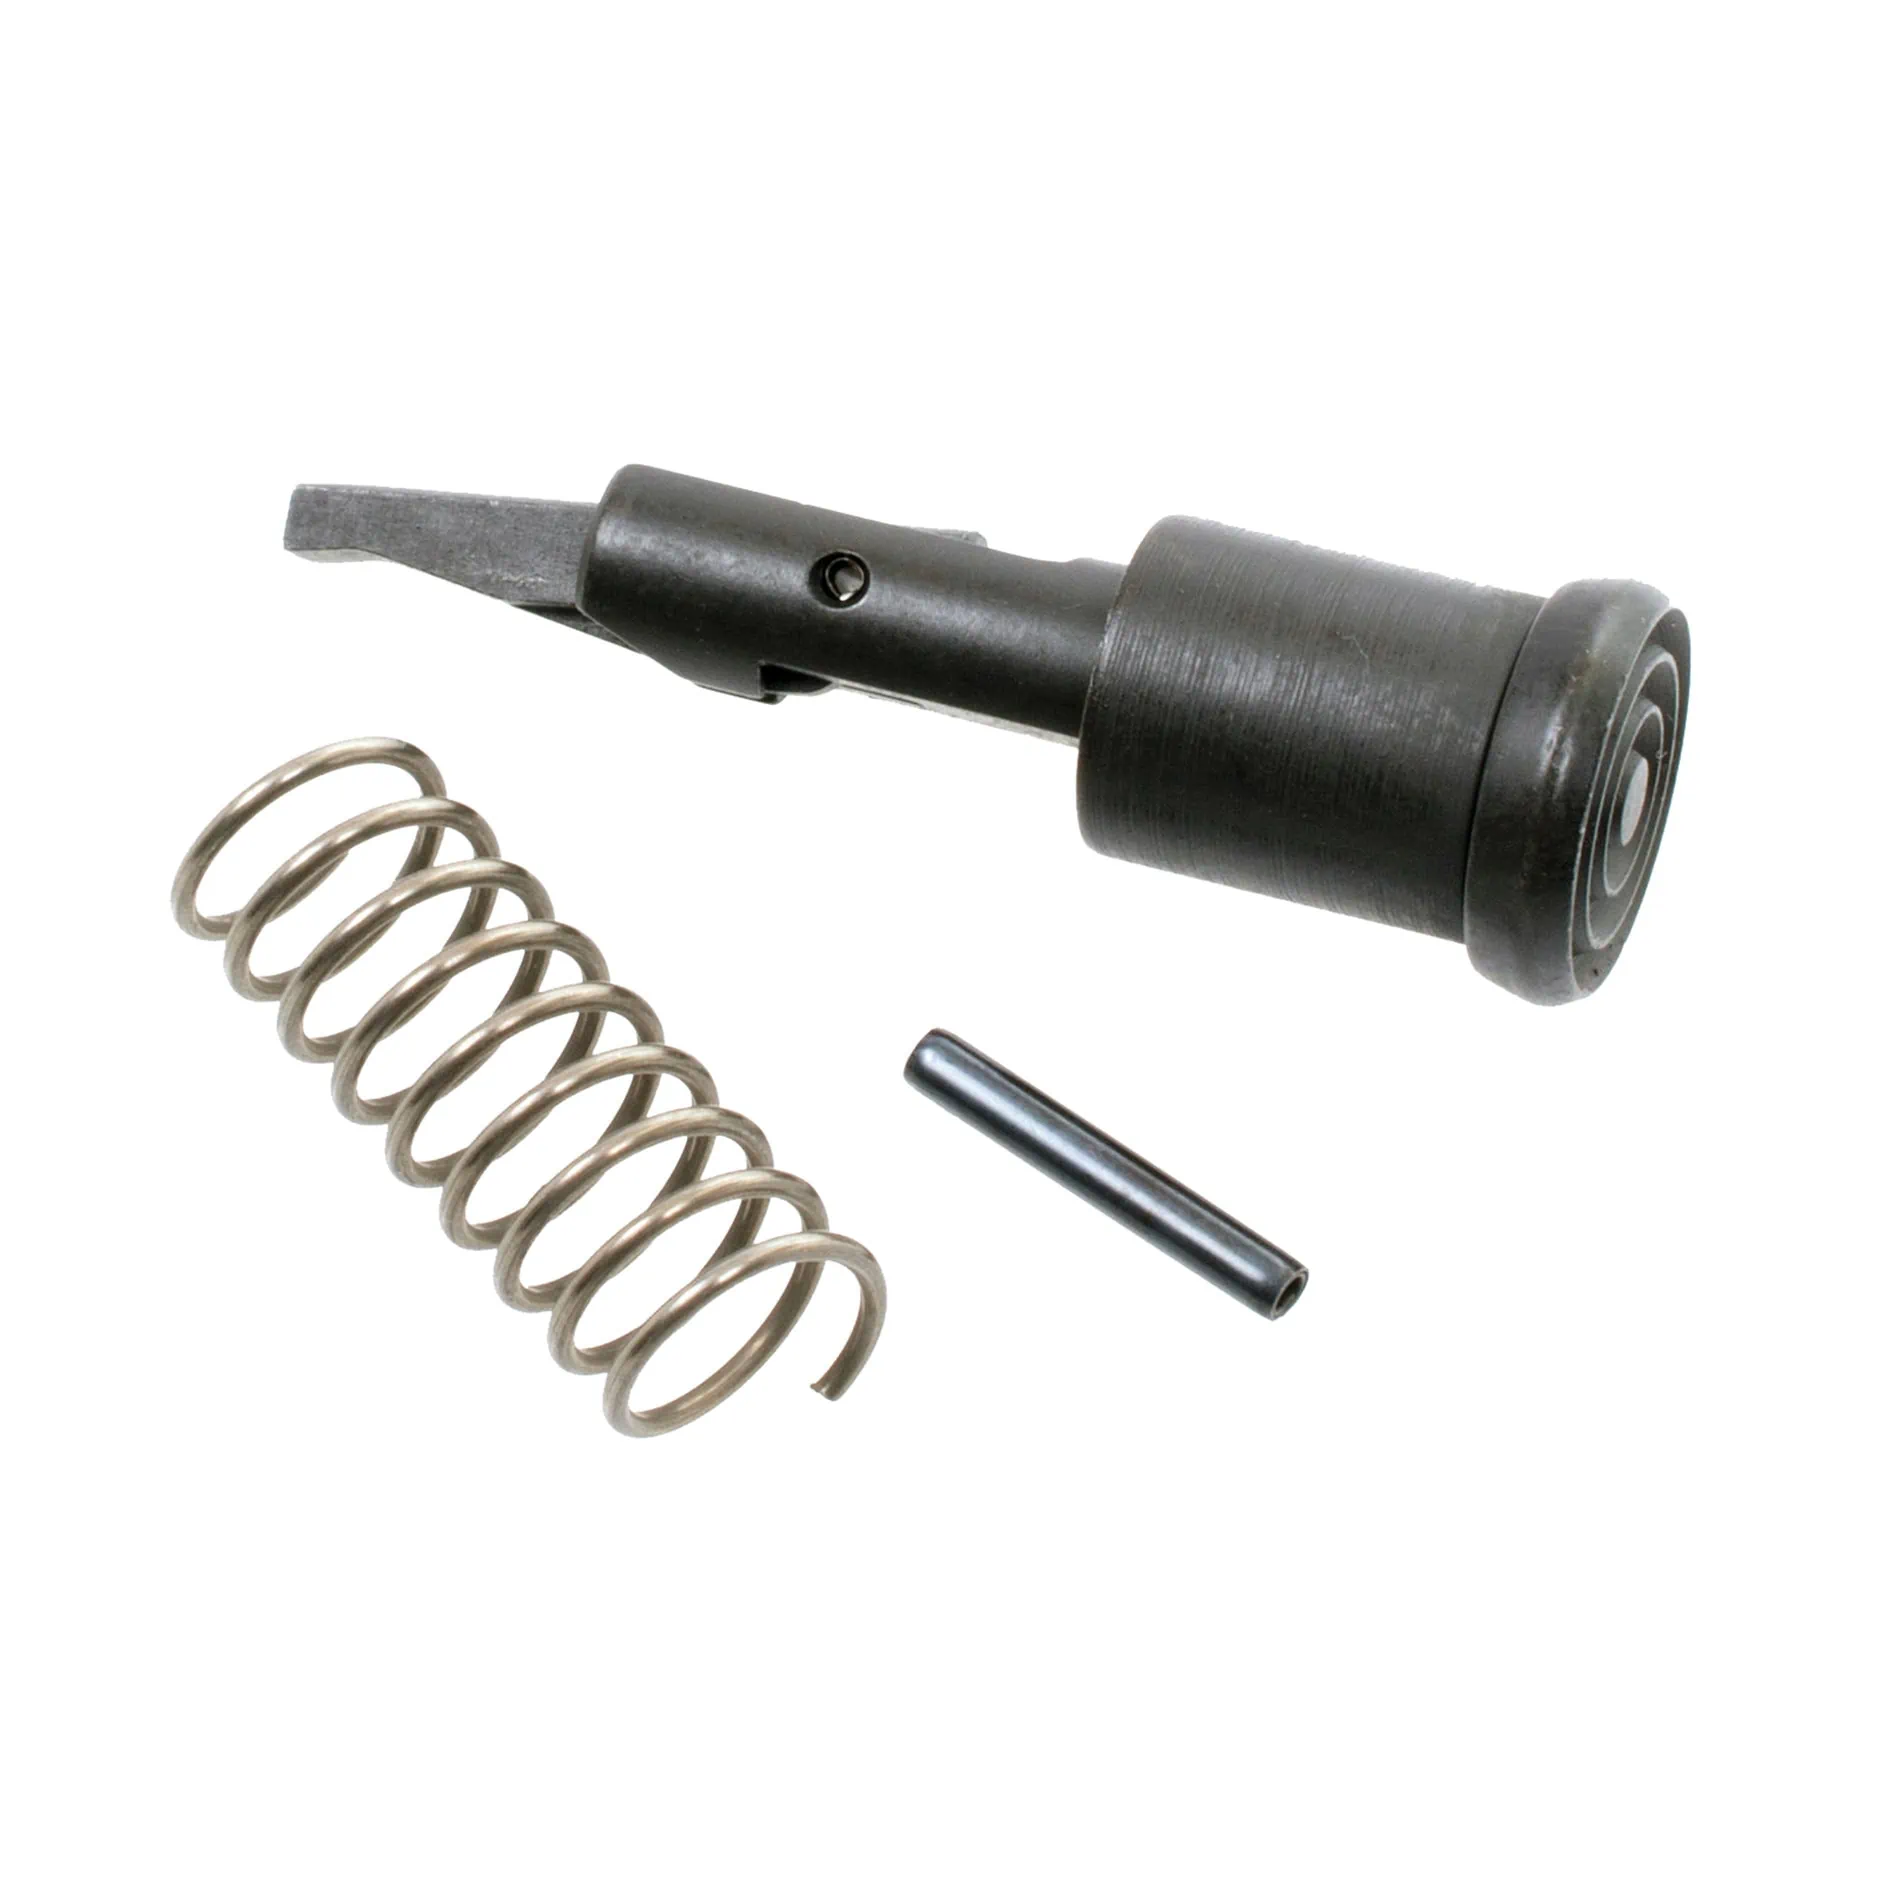 CMMG, Forward Assist Kit, Includes Forward Assist Assembly, Spring, and Installation Pin, Black Finish